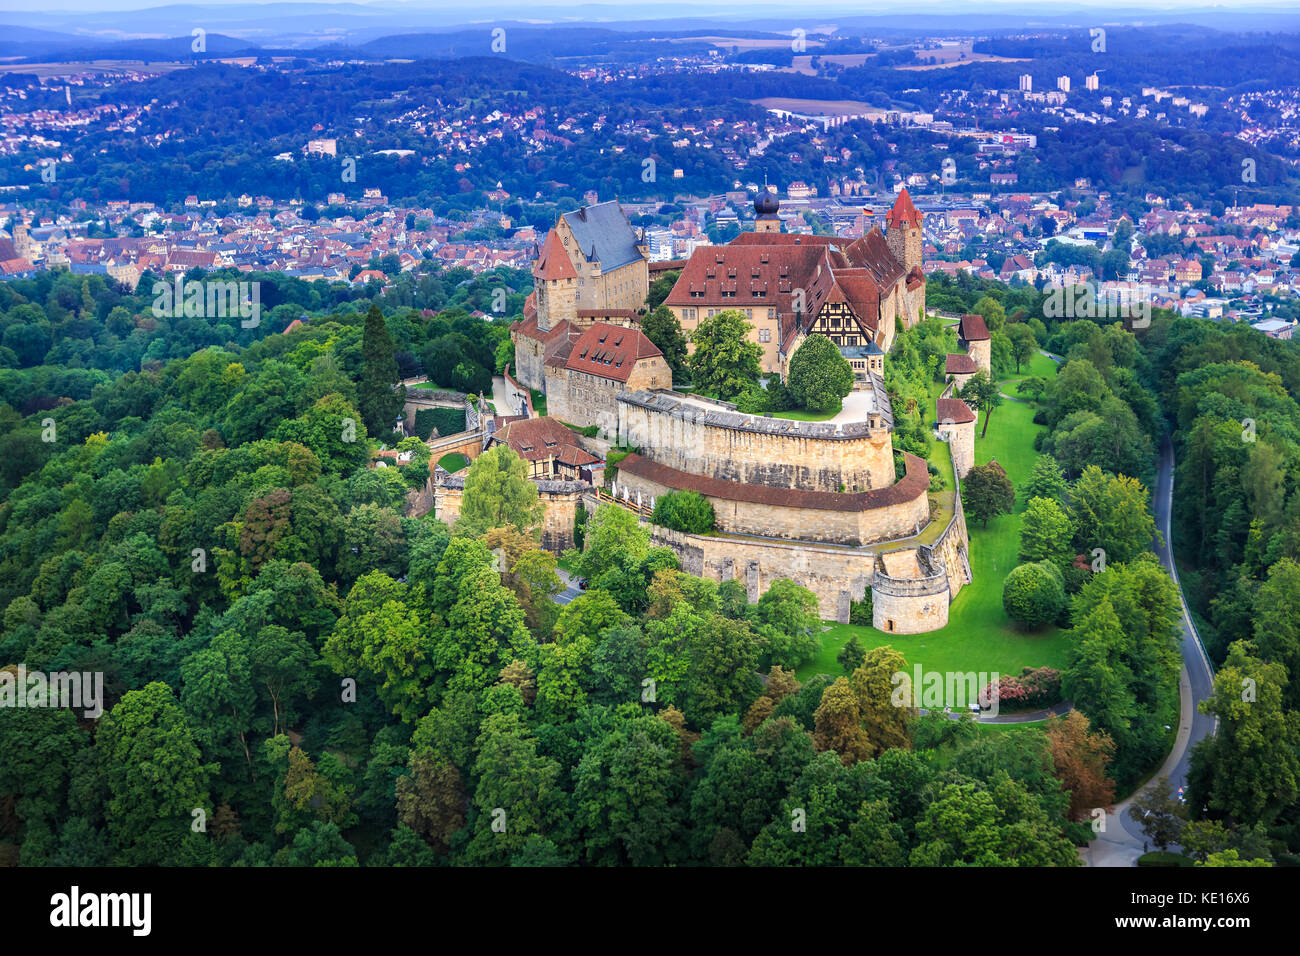 Air view of Veste fortress in Coburg, Bavaria, Germany Stock Photo